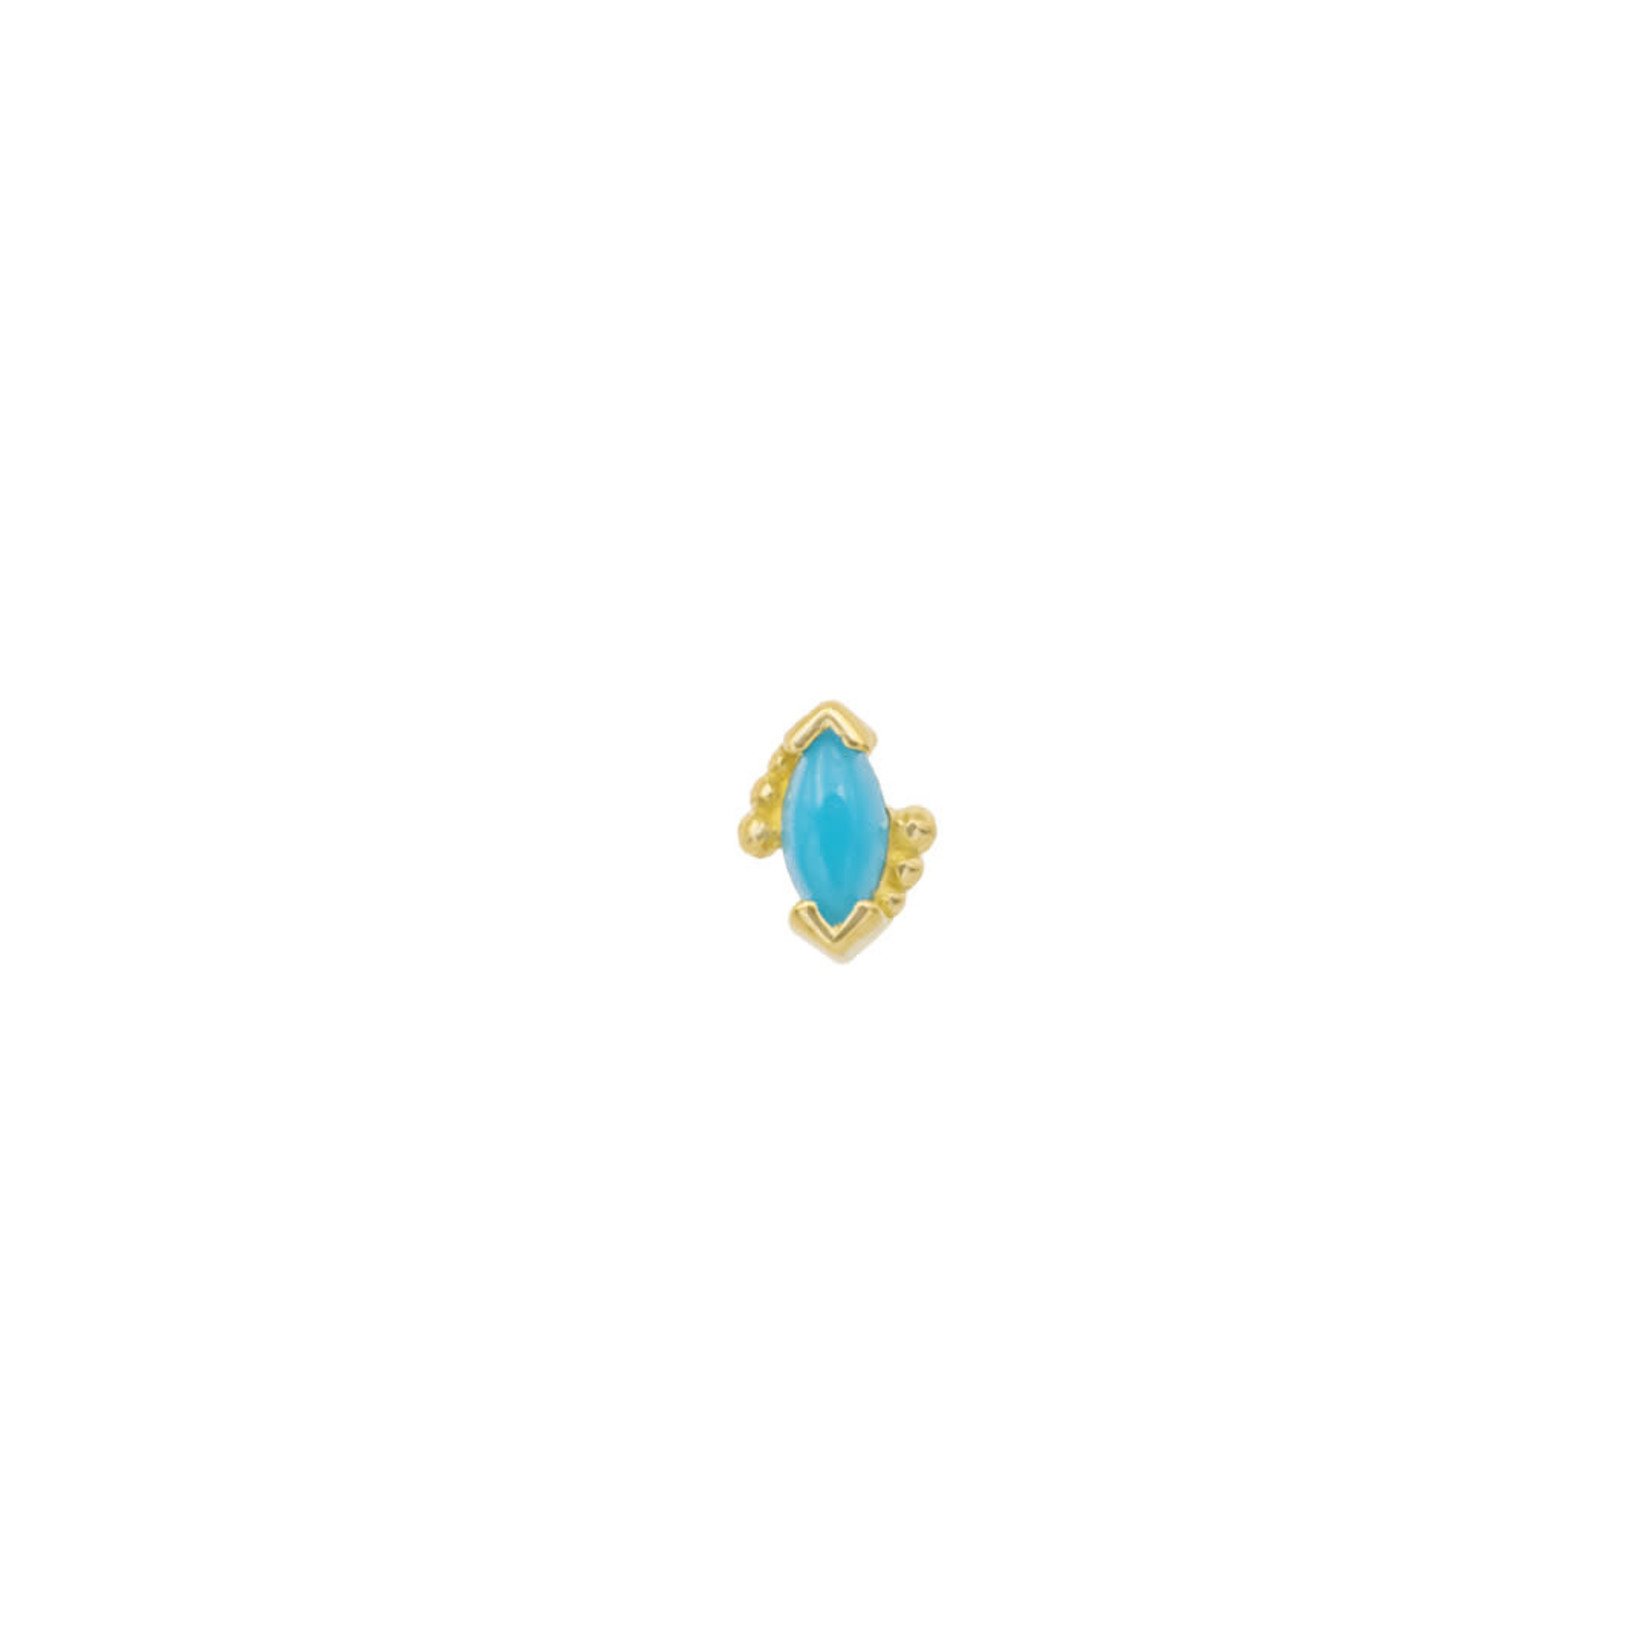 BVLA BVLA "Beaded Marquise" press-fit end with 4x2 Turquoise